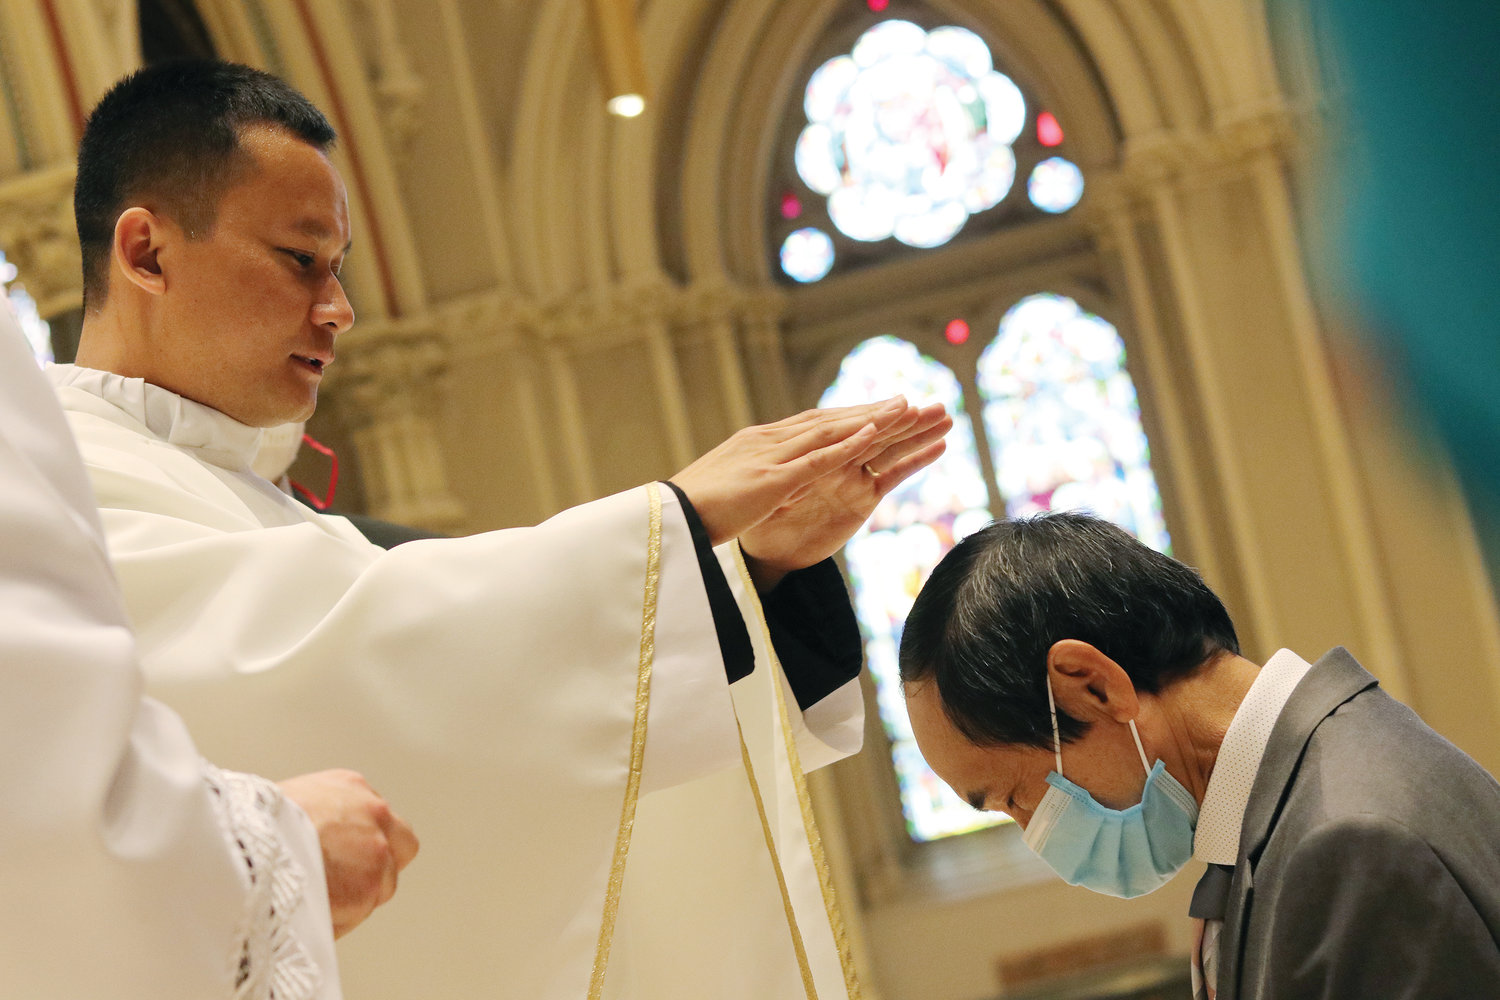 Following the Mass, Father Hiep Van Nguyen confers individual blessings upon those gathered.